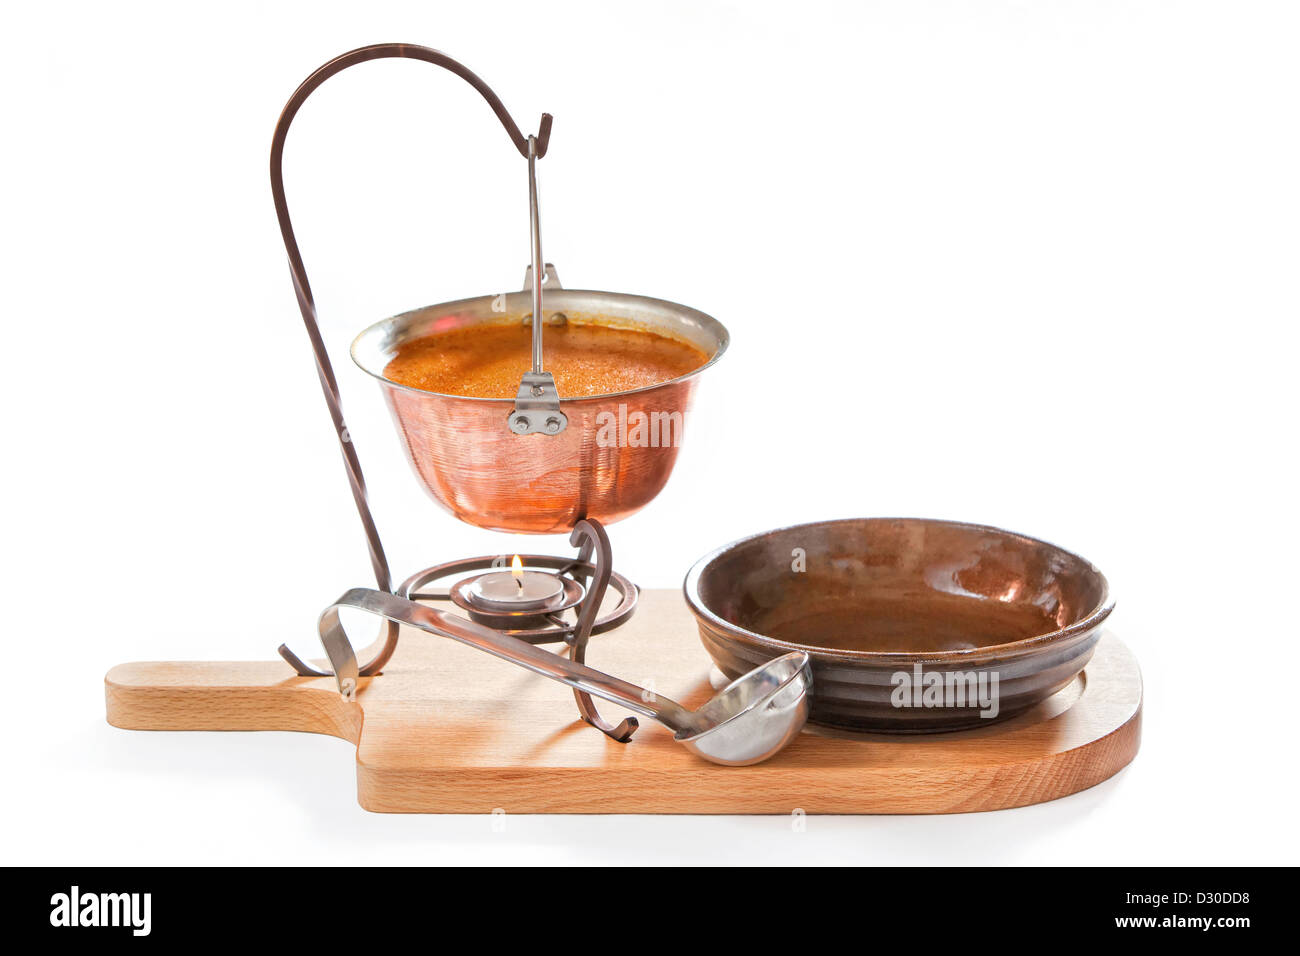 Goulash soup in a pot with ladle and plate on white background Stock Photo